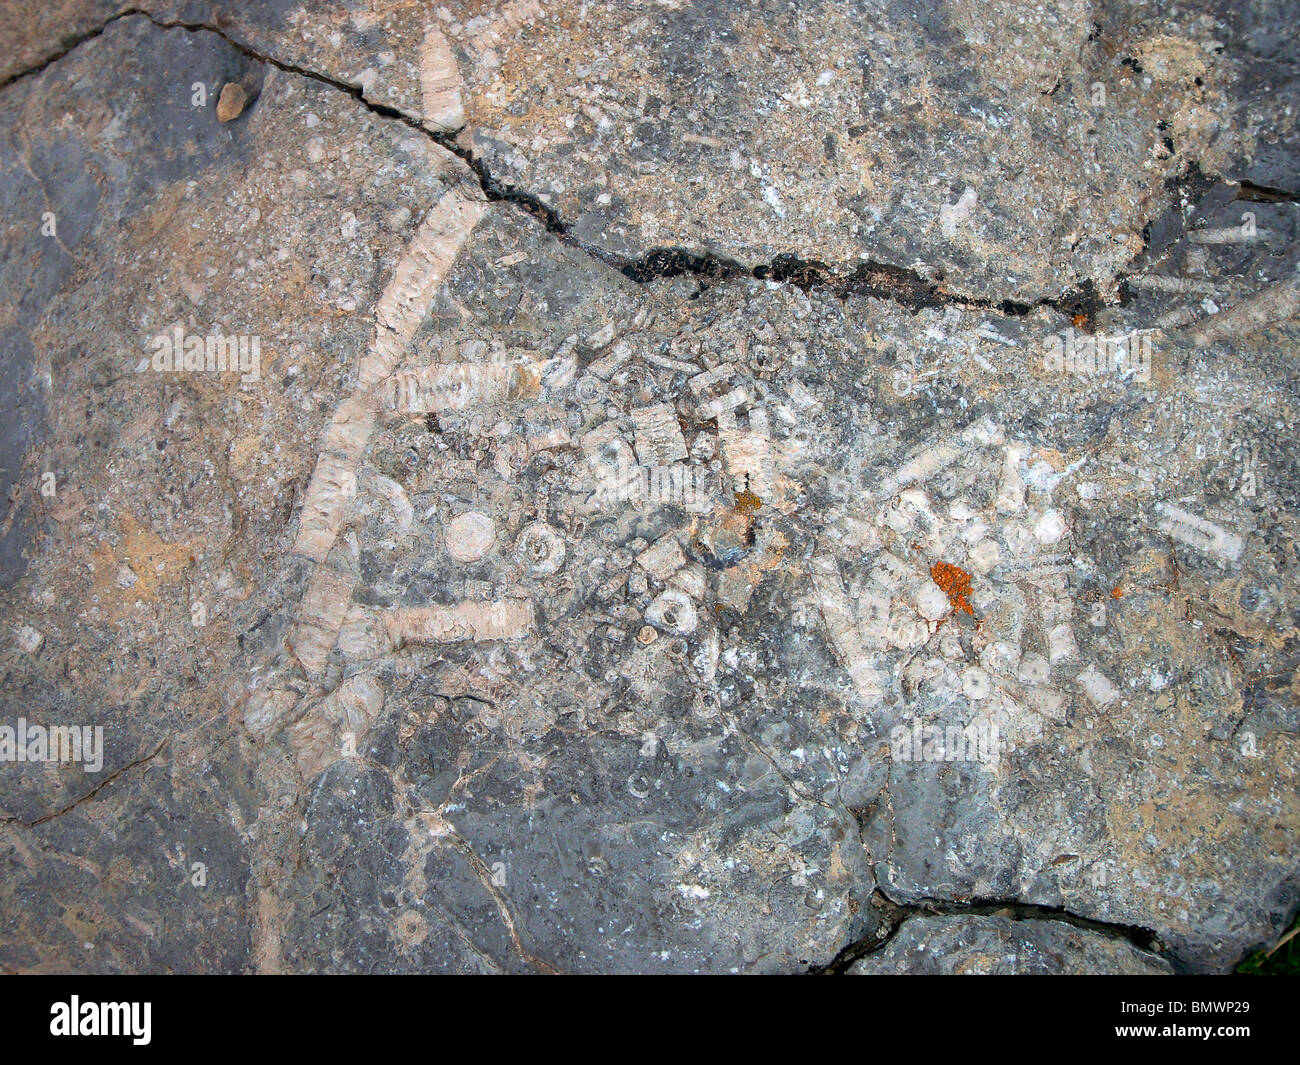 Fossils in rock Sandia Crest New Mexico USA Stock Photo